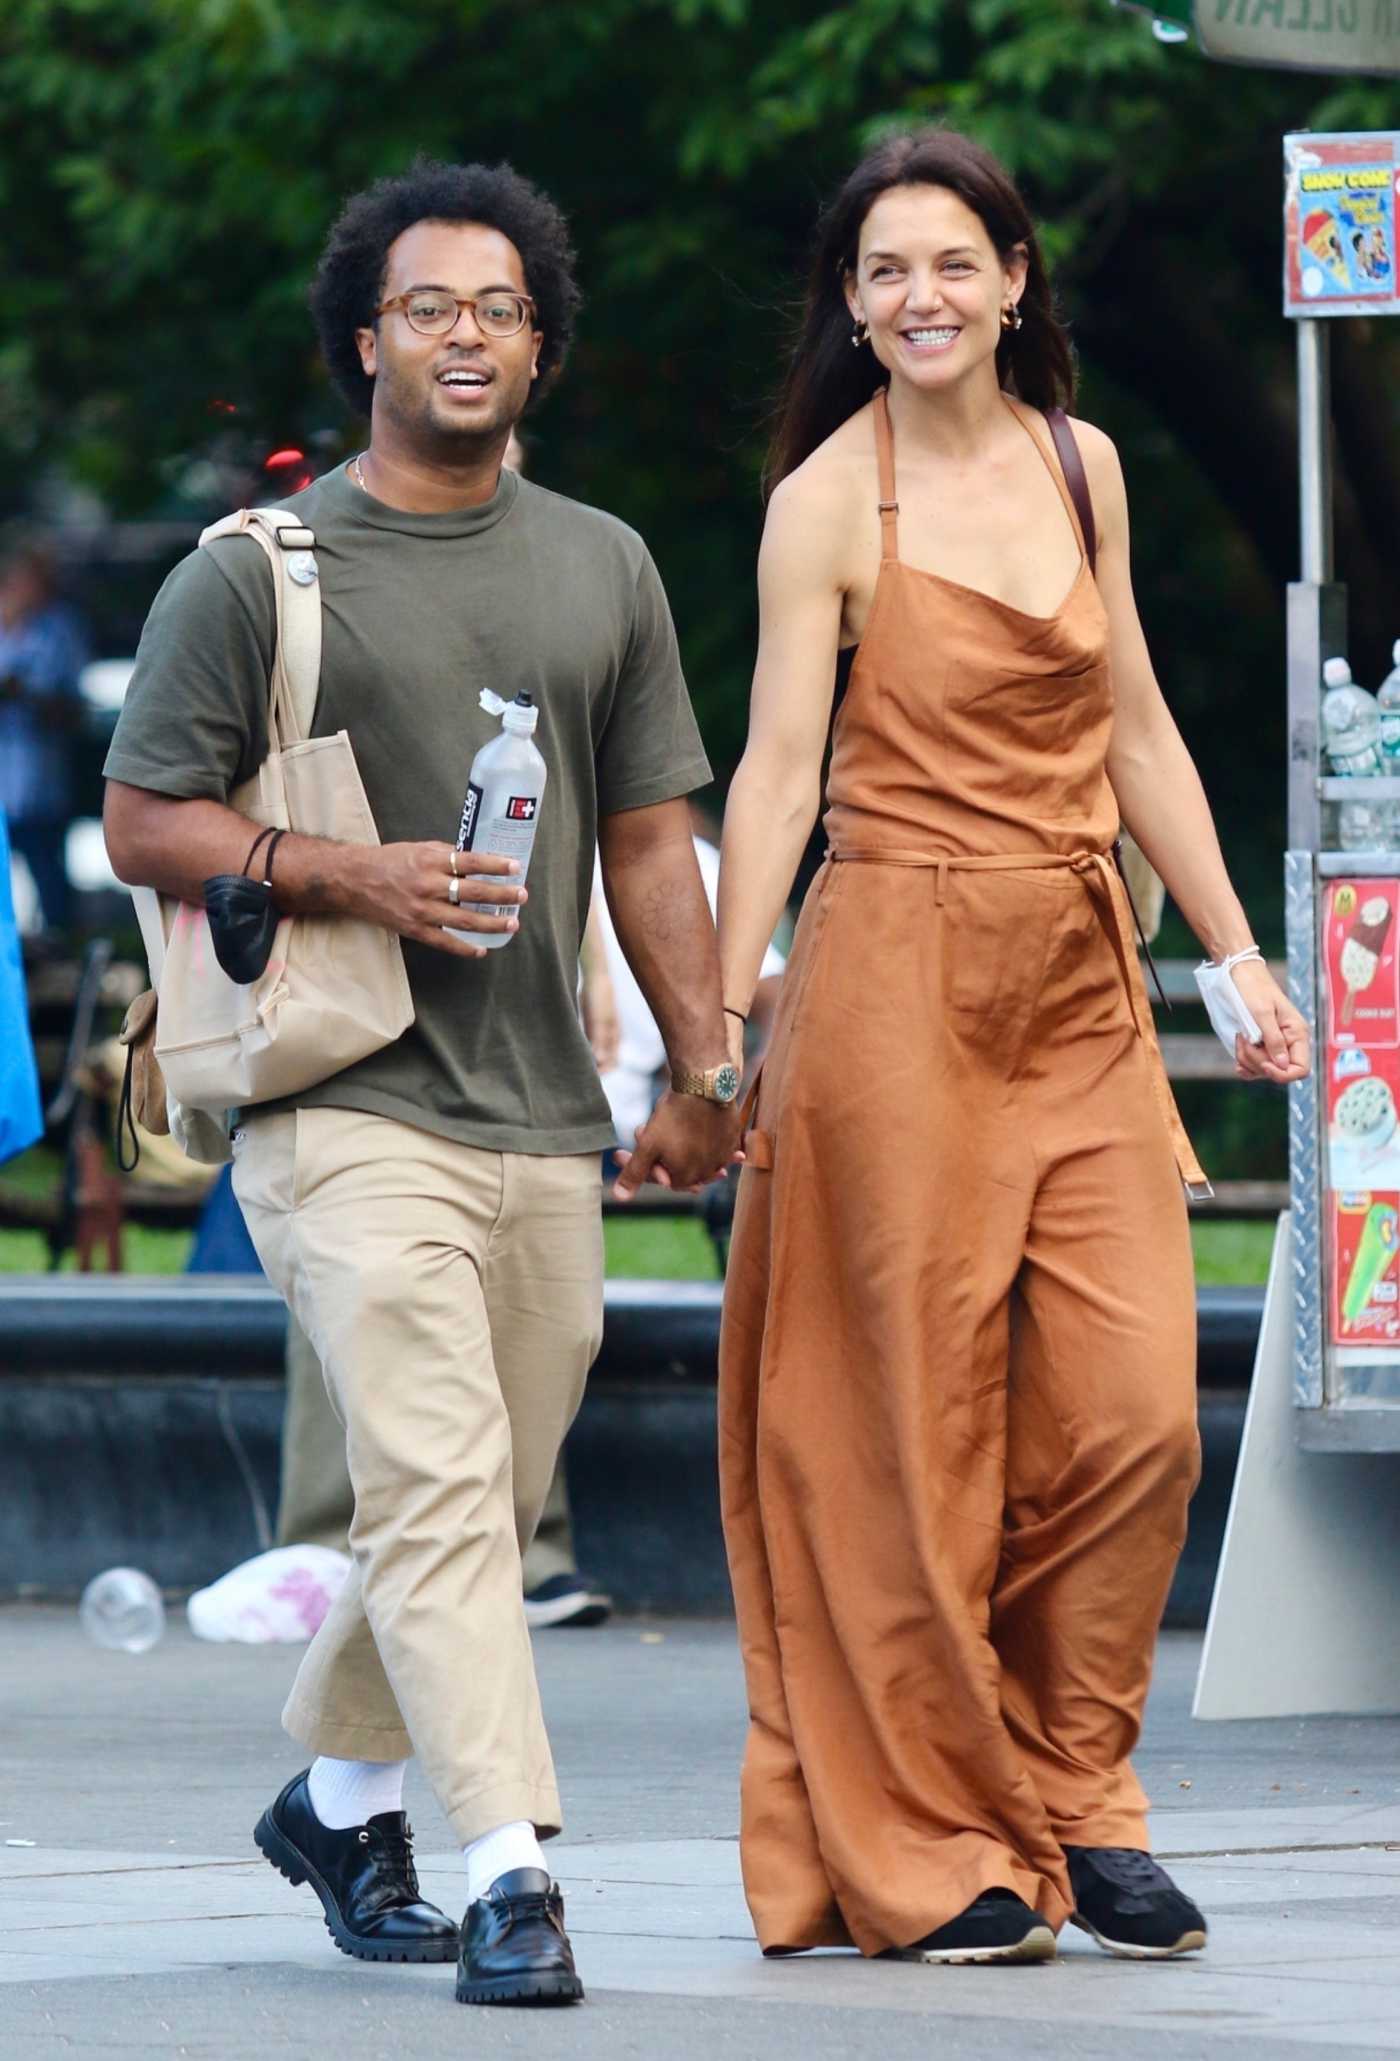 Katie Holmes in a Tan Jumpsuit Was Seen Out with Bobby Wooten III in Manhattan’s Washington Square Park in NYC 08/06/2022